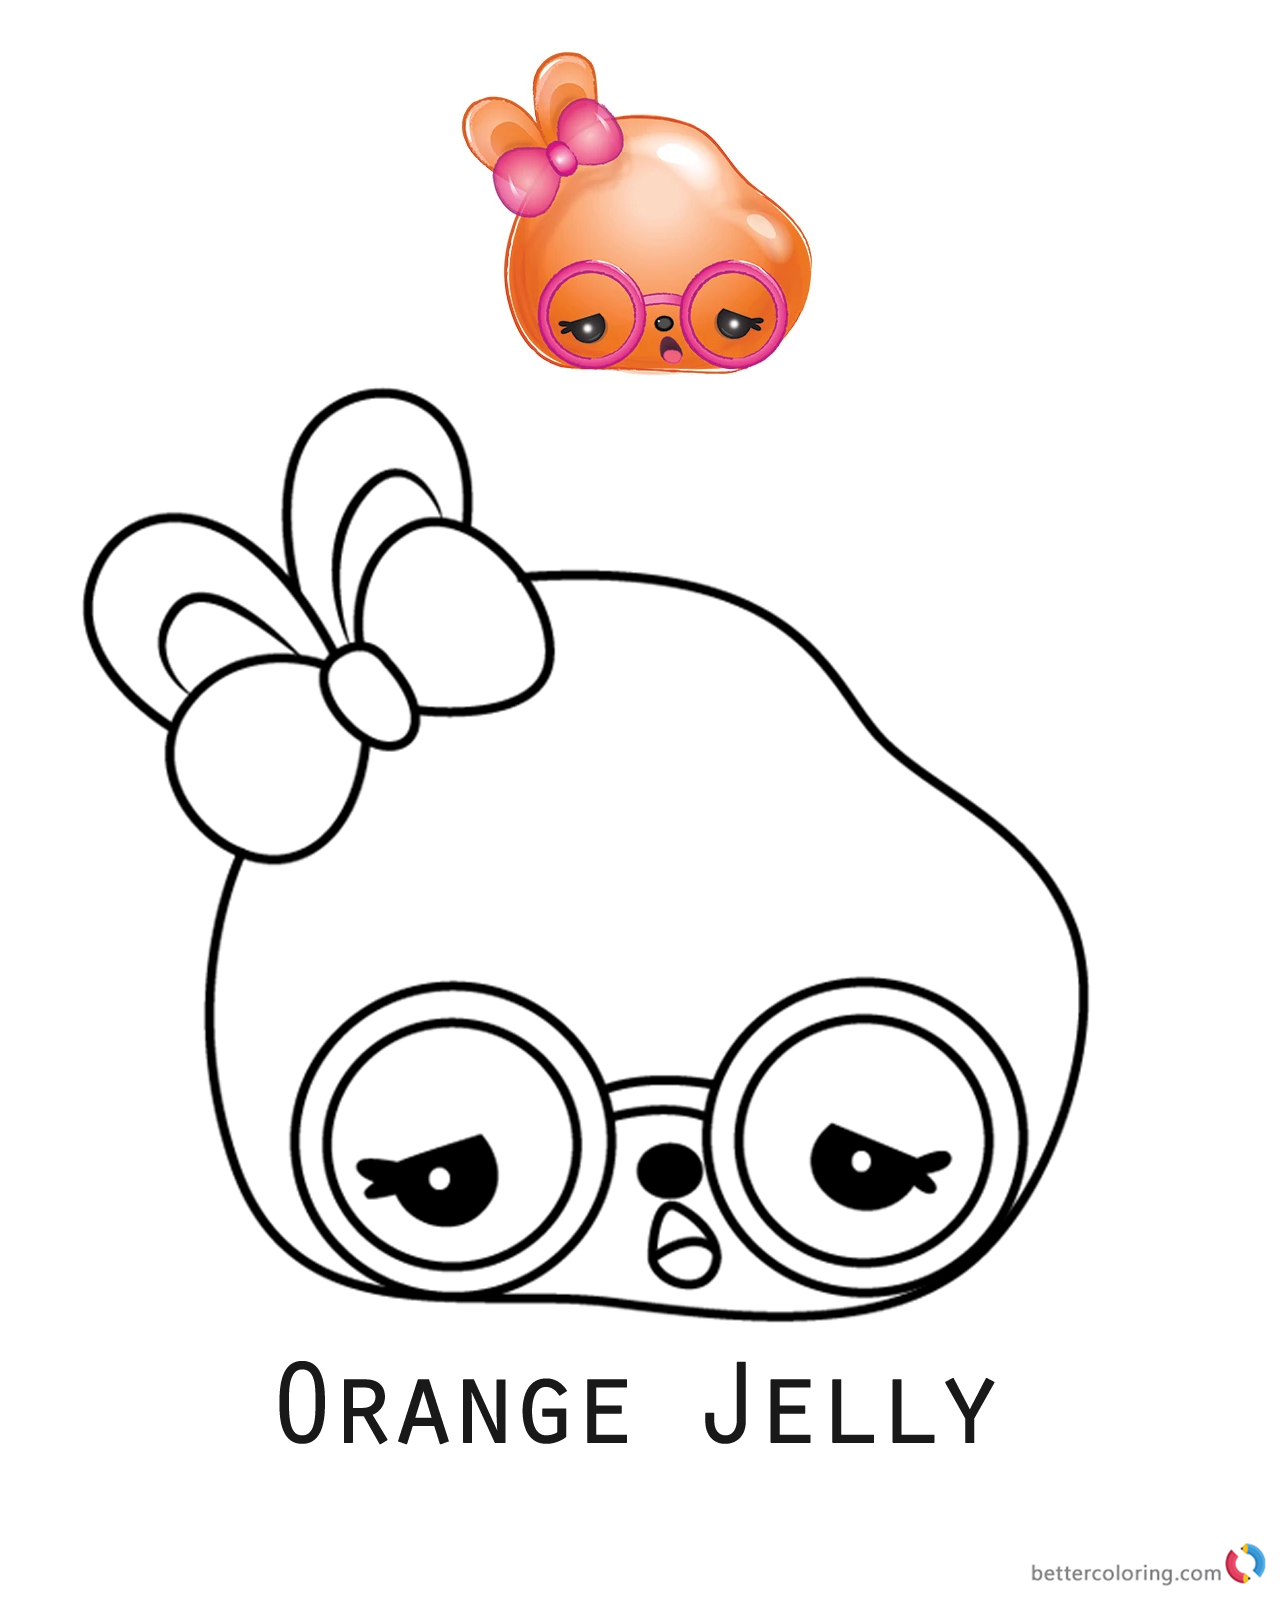 Orange Jelly from Num Noms coloring pages printable